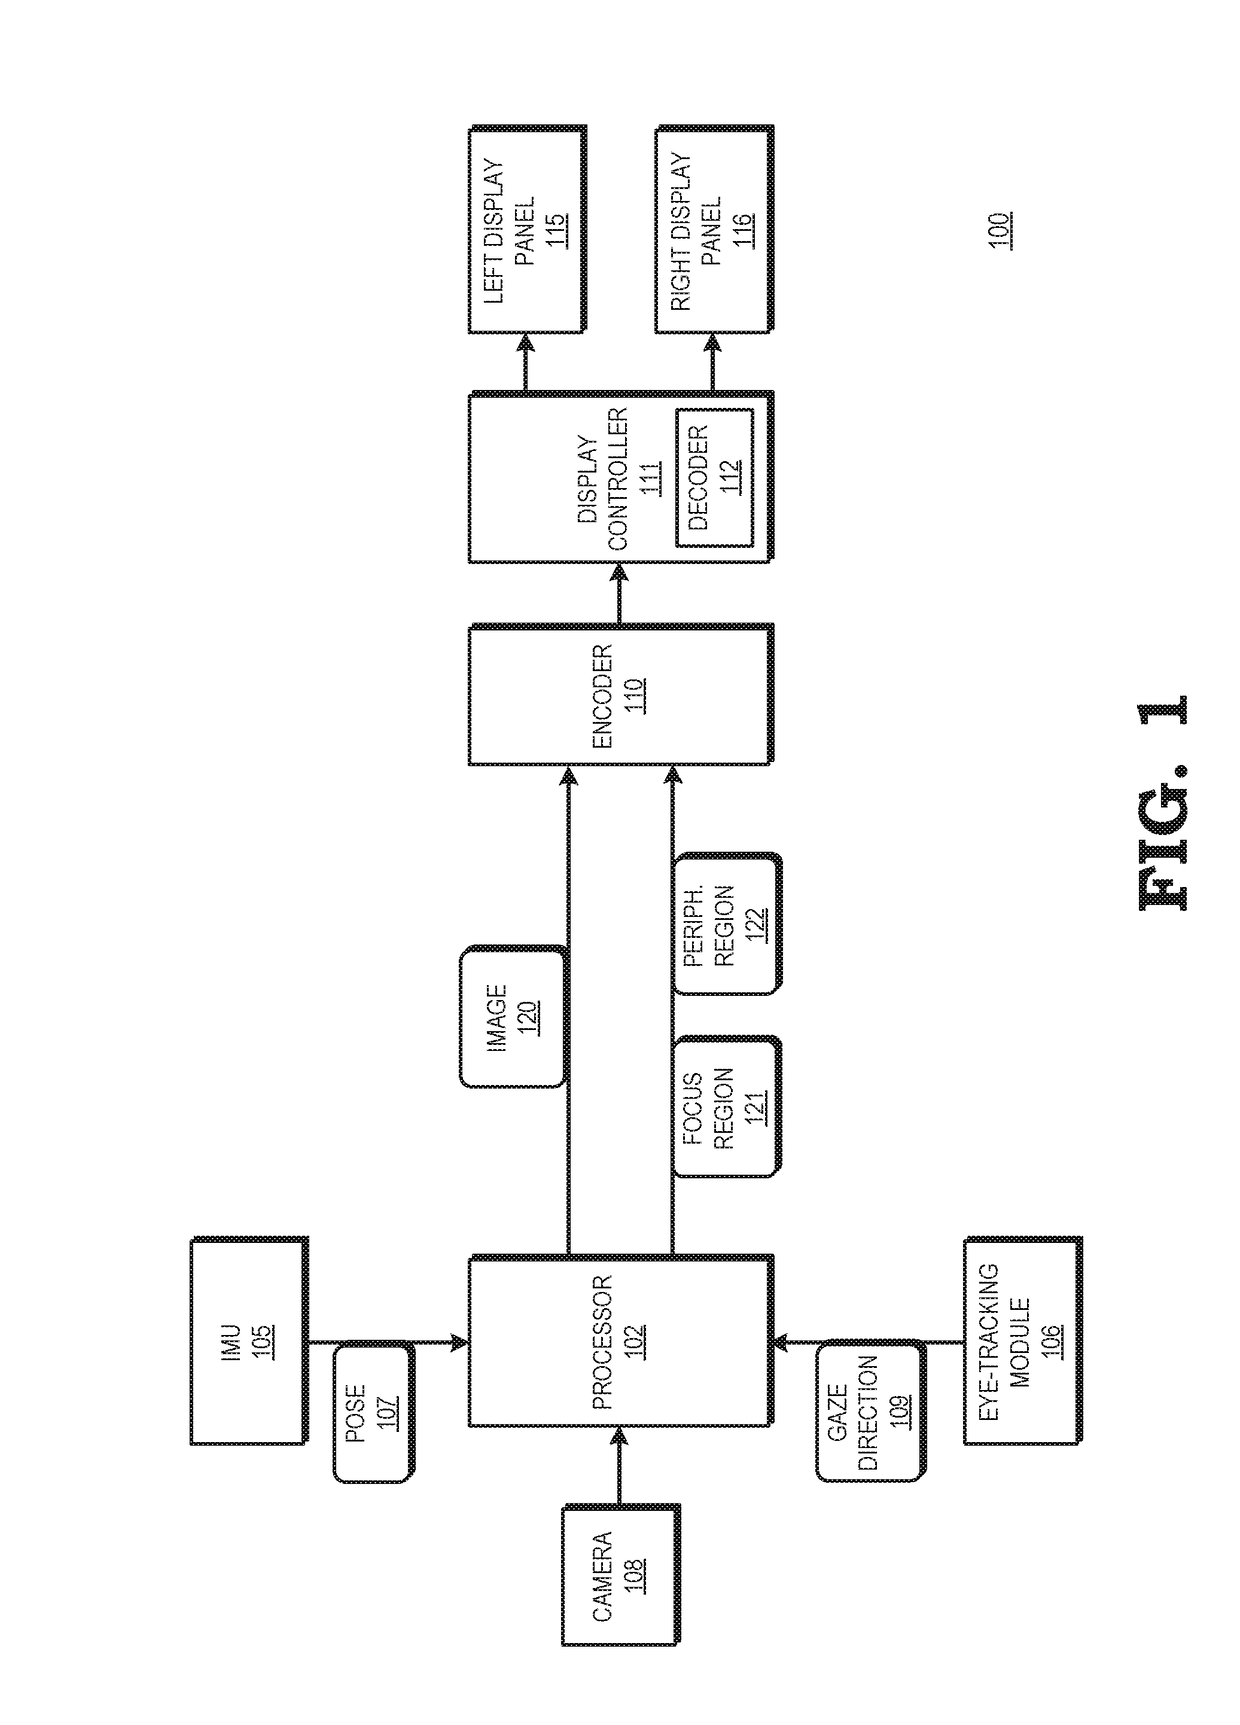 Encoding image data at a head mounted display device based on pose information